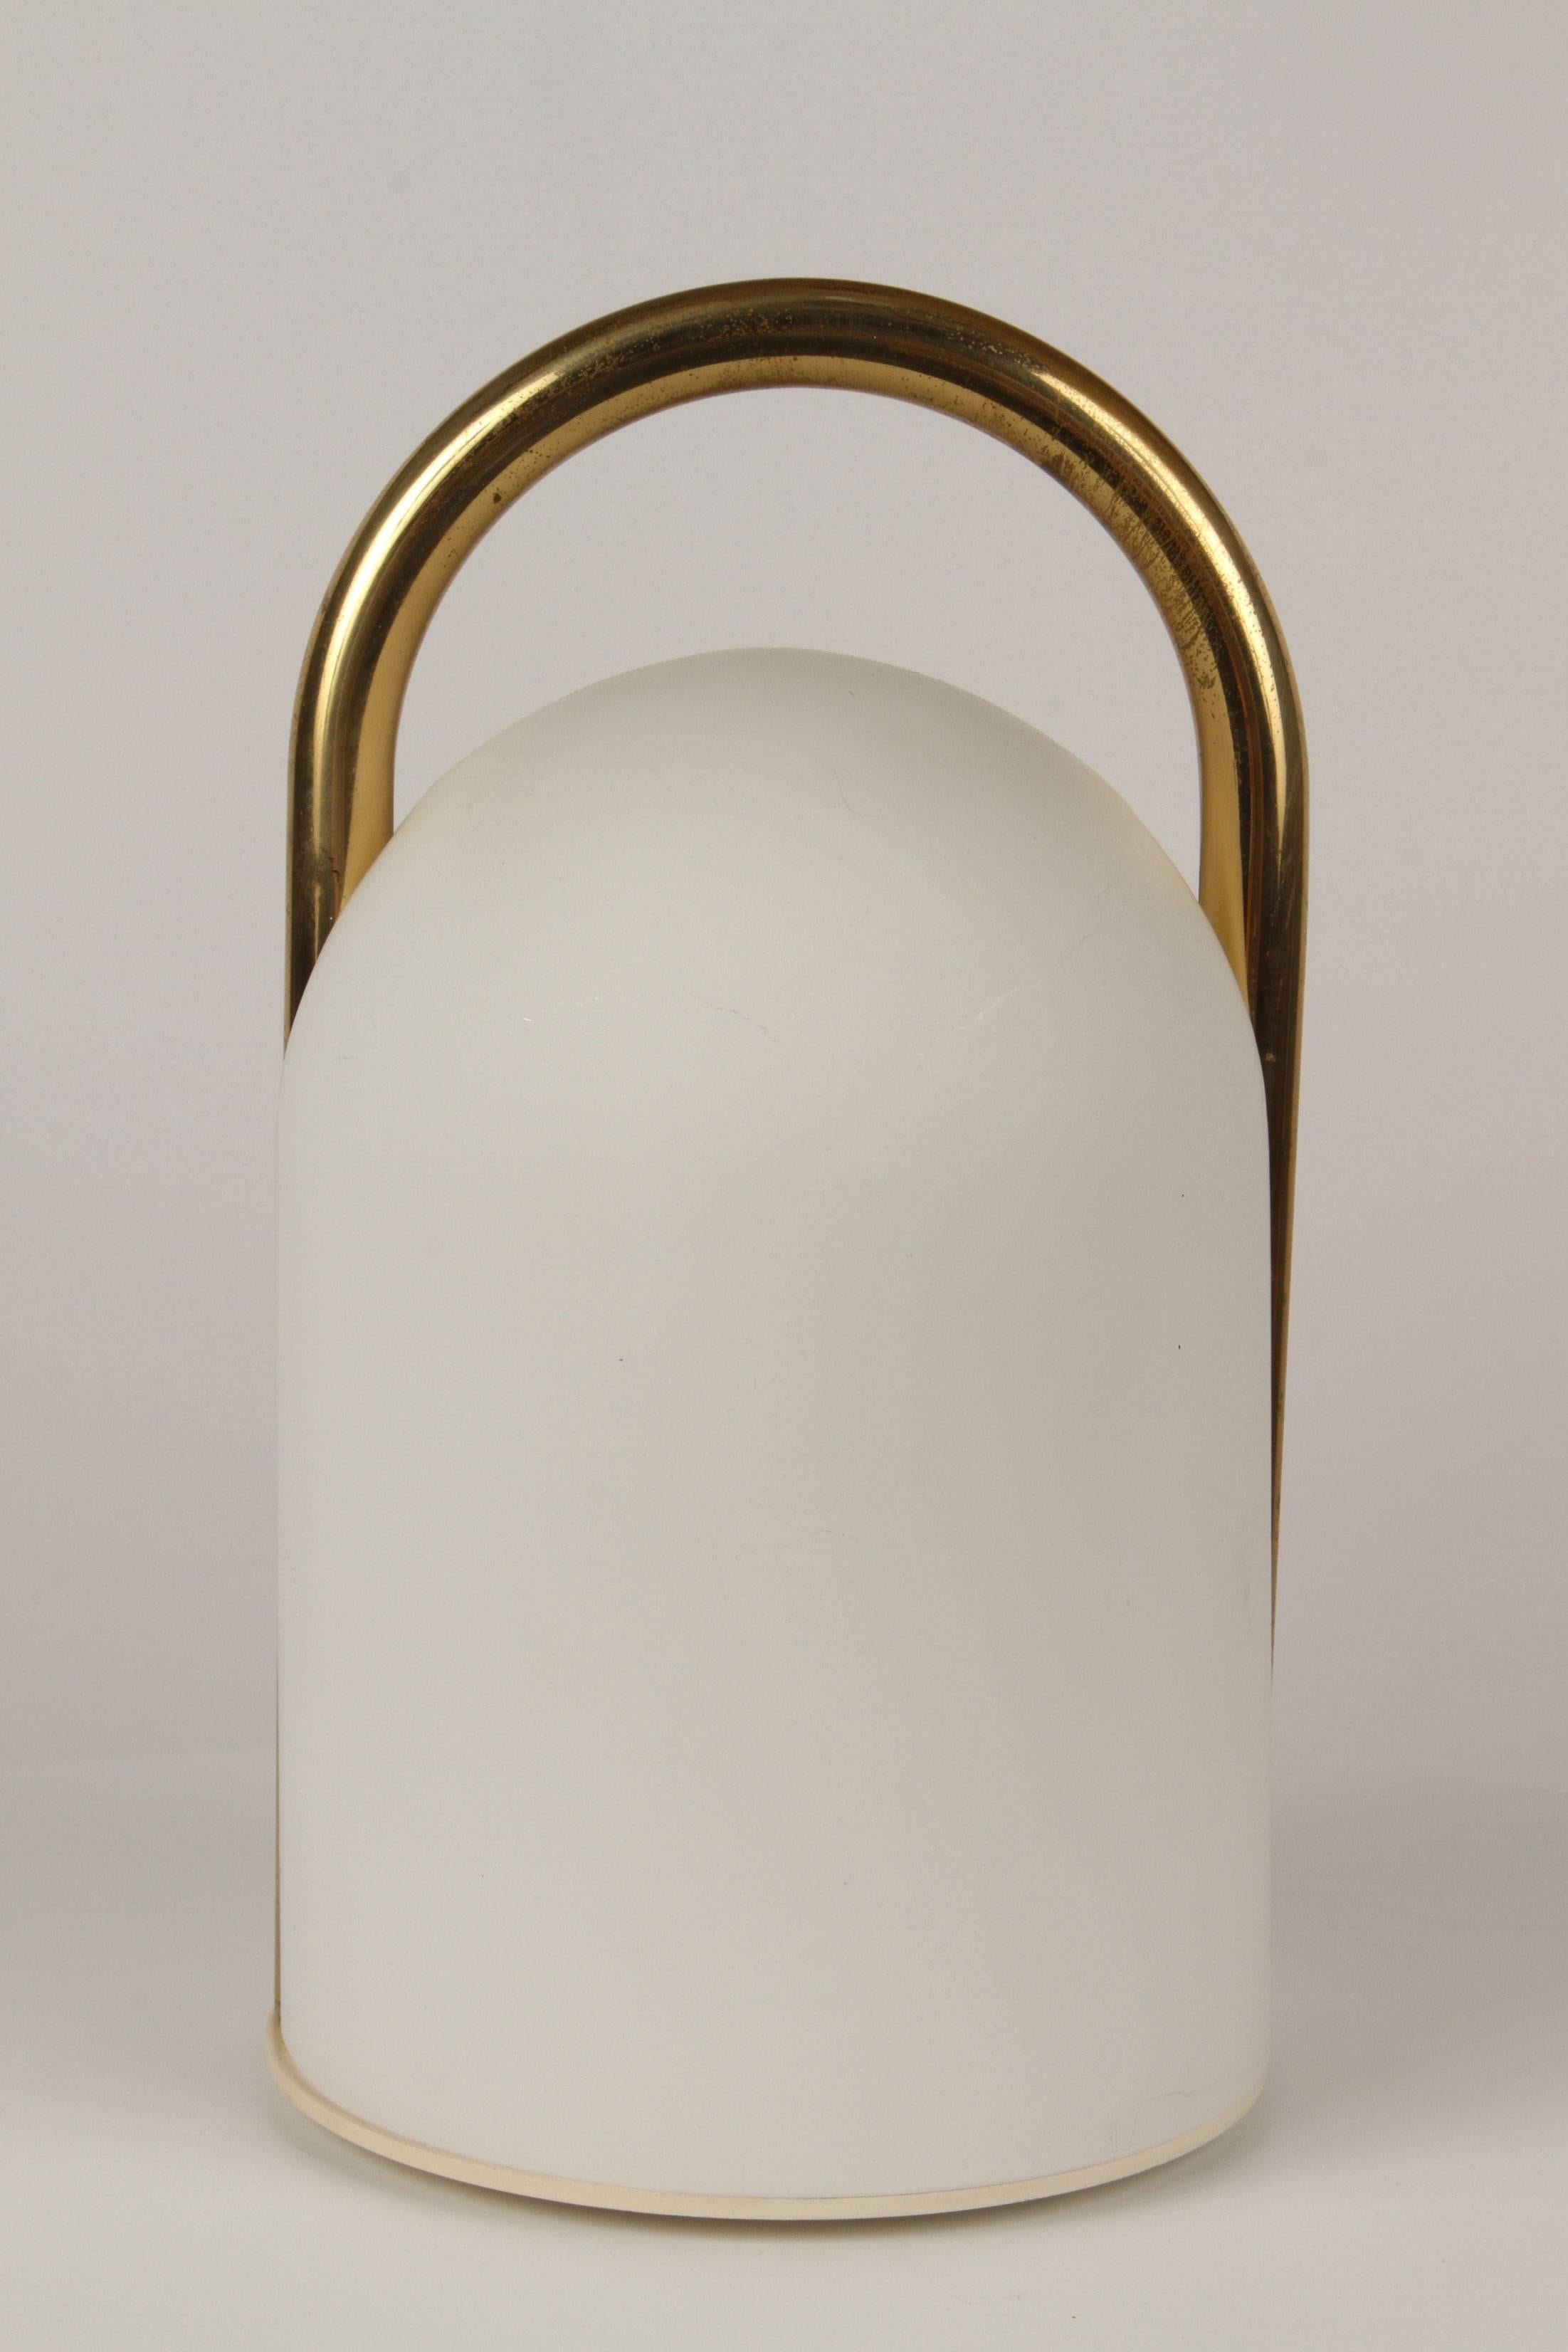 1980s Romolo Lanciani 'Tender' table lamps for Tronconi. Executed in opaline glass and rare brass finish, Italy, circa 1980s.

Price is for the pair.

Tronconi was a major Italian lighting and design company founded by Enrico Tronconi.